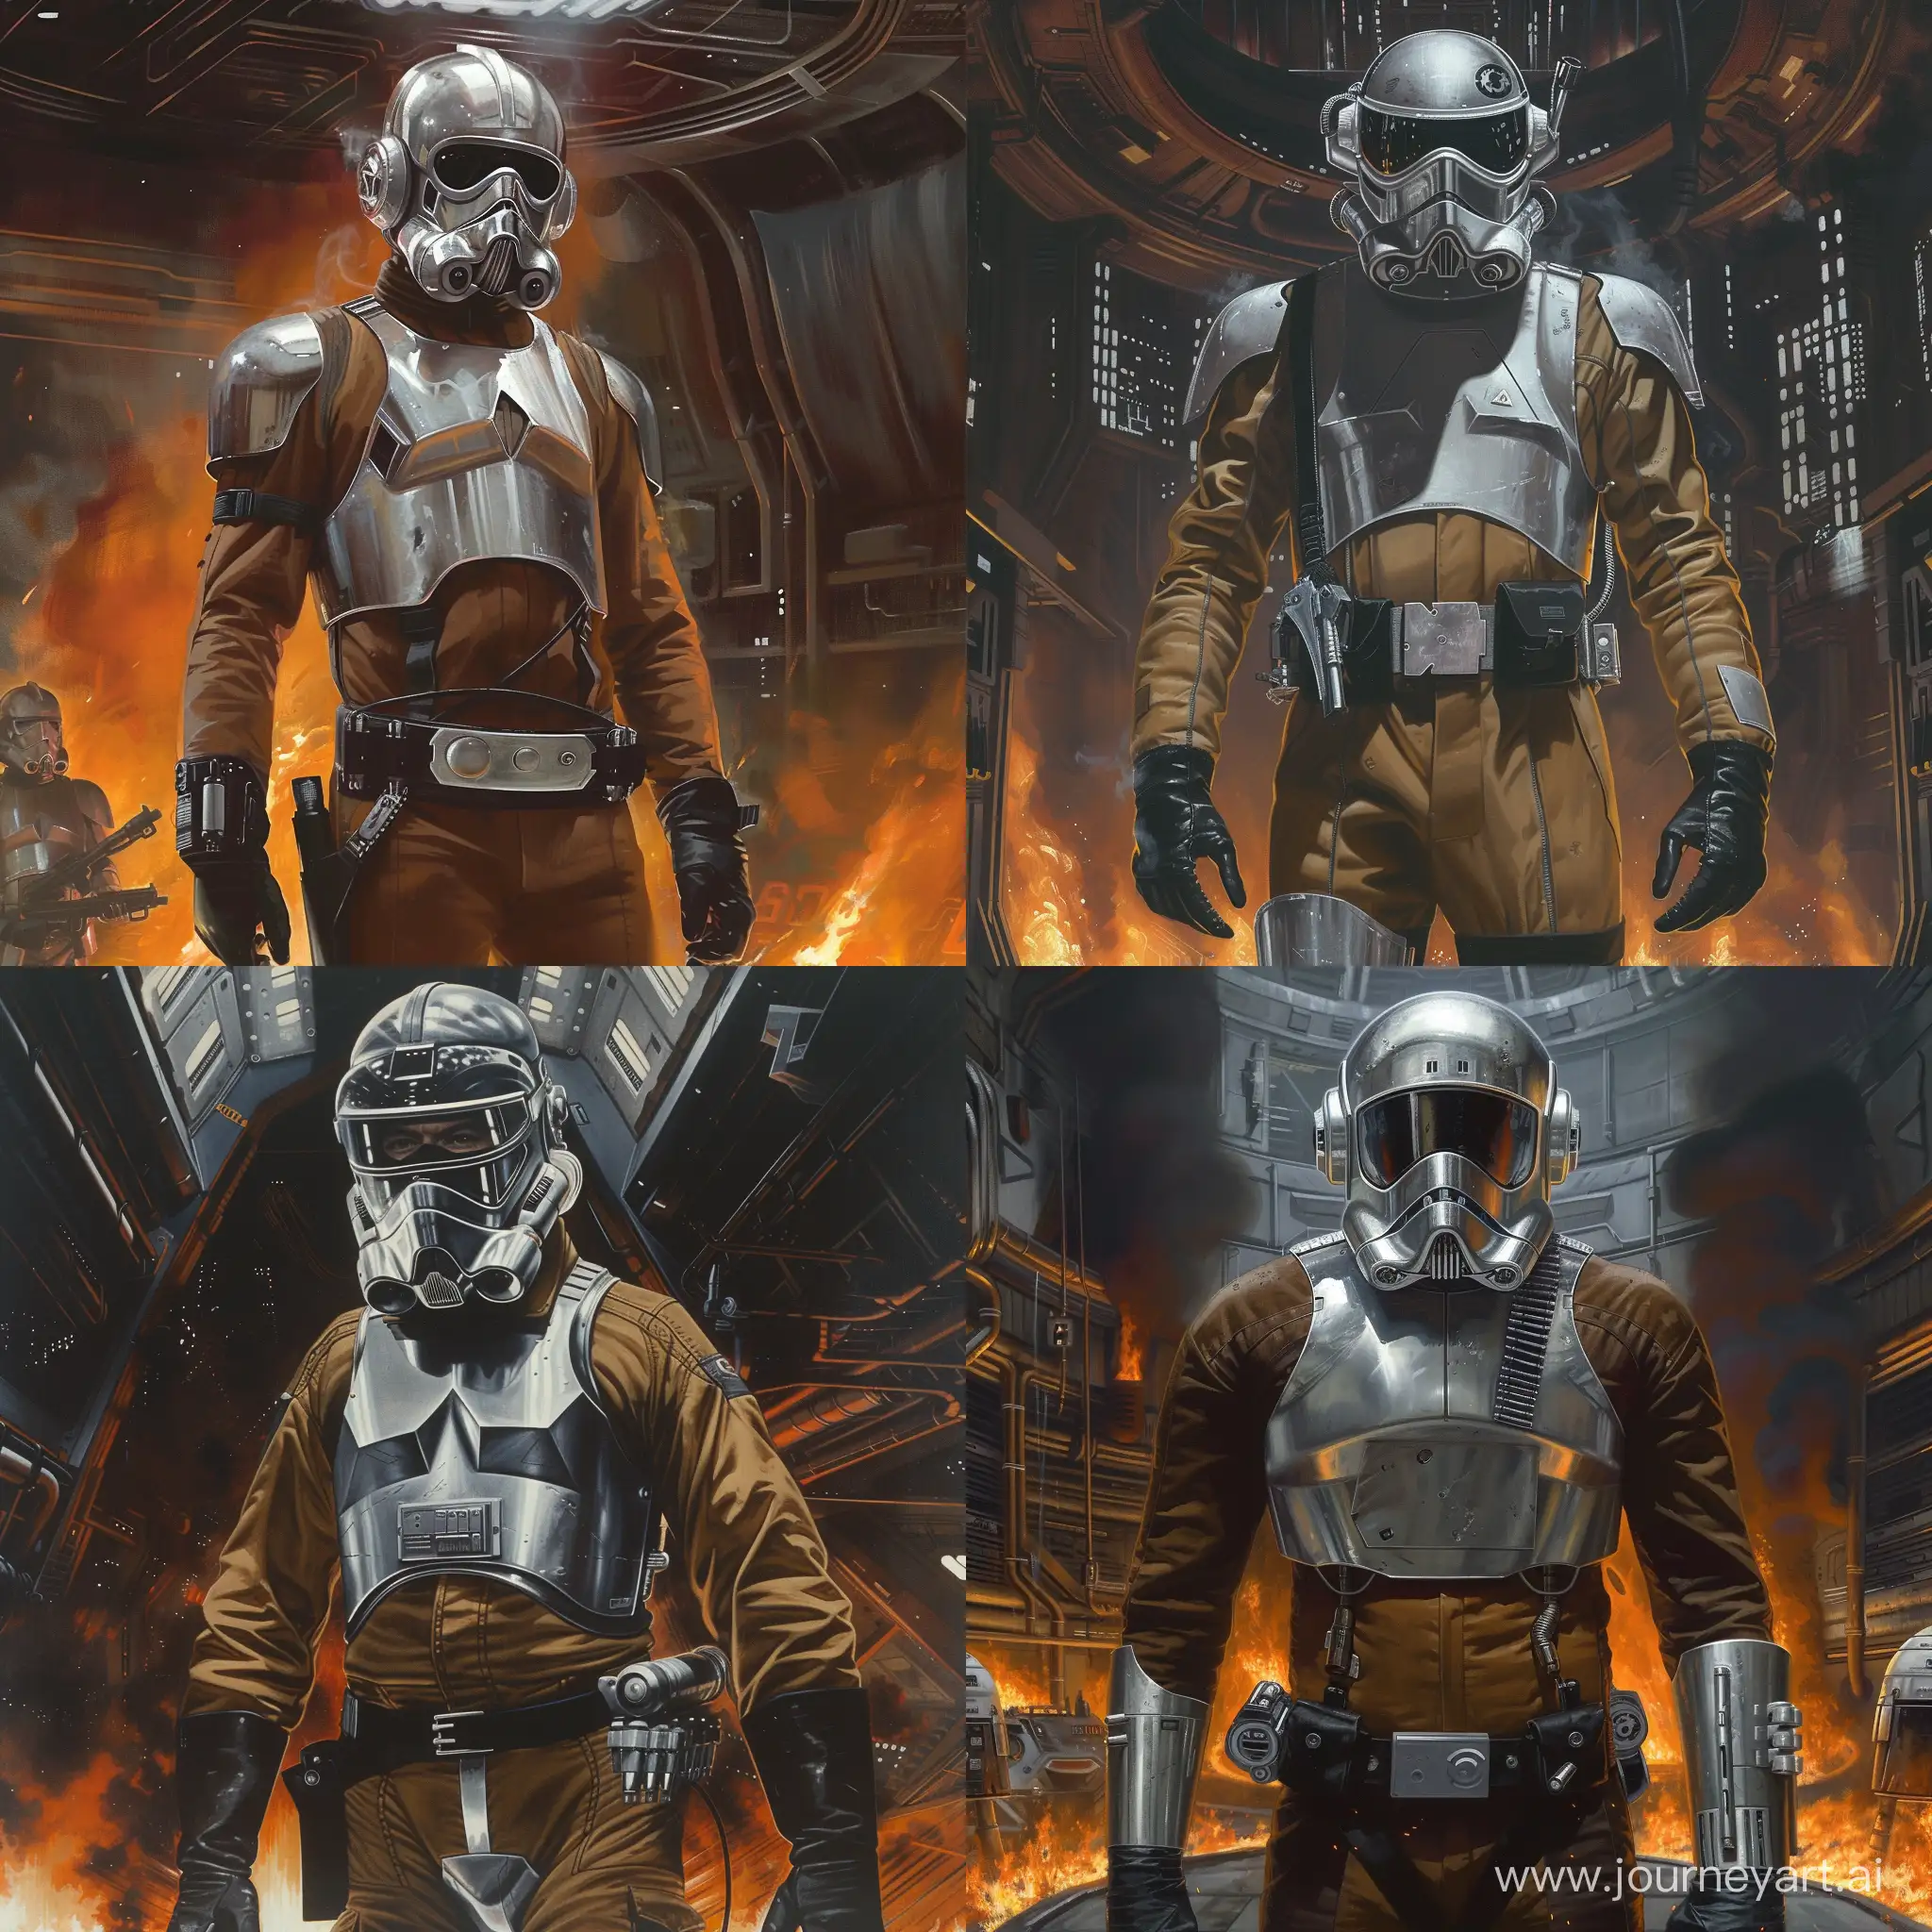 A tall man wearing a silver mask with a visor and a respirator, wearing a suit of silver sci-fi armor over a brown bodysuit with black rubber gloves. He wears a belt with weapons
Futuristic, militarism, Closed Face, Visor, Respirator.
Painted by Ralph McQuarrie
Burning dark space station hall in the background. 